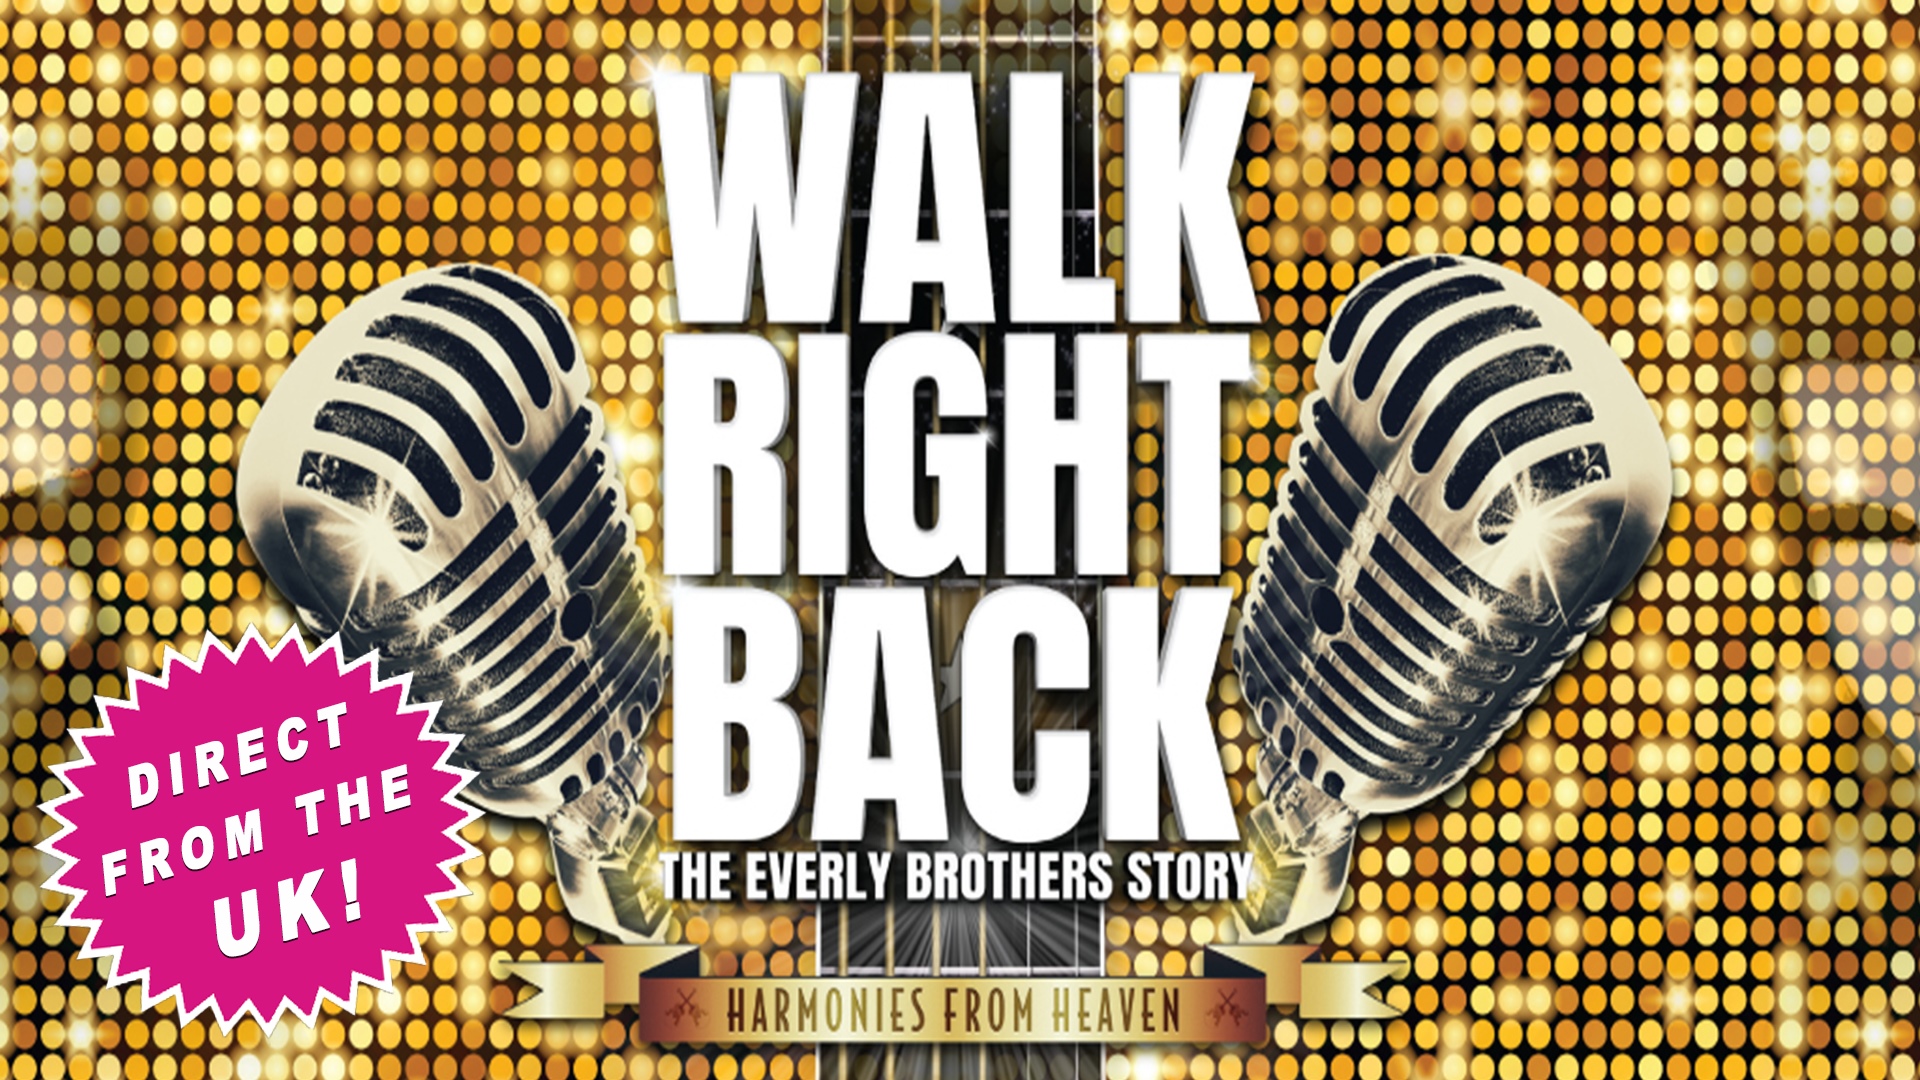 Walk Right Back: The Everly Brothers Story - March 28th at TCU Place